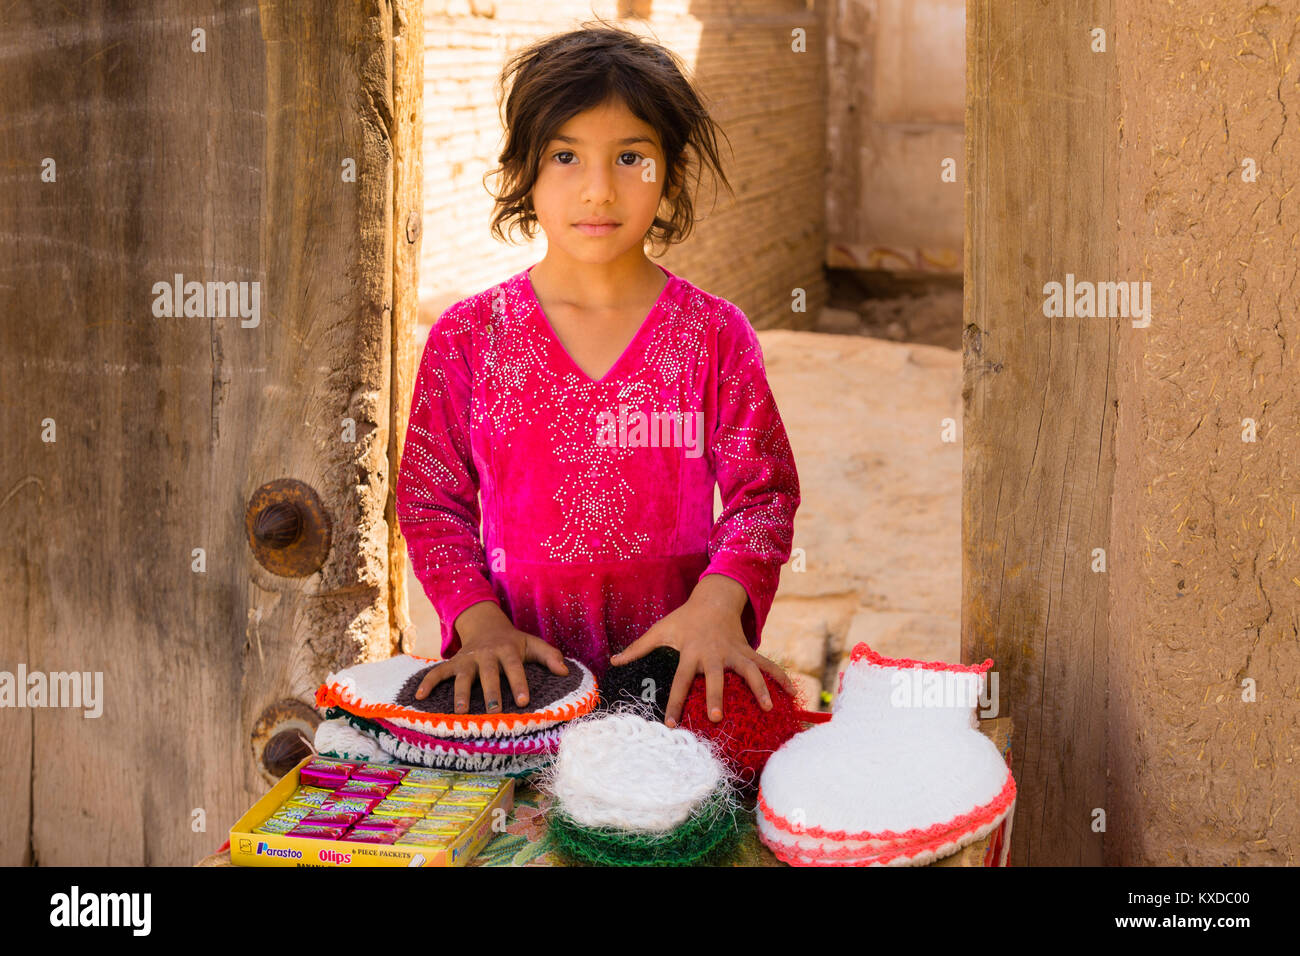 Young girl sells goods in the streets of Yazd, Iran Stock Photo